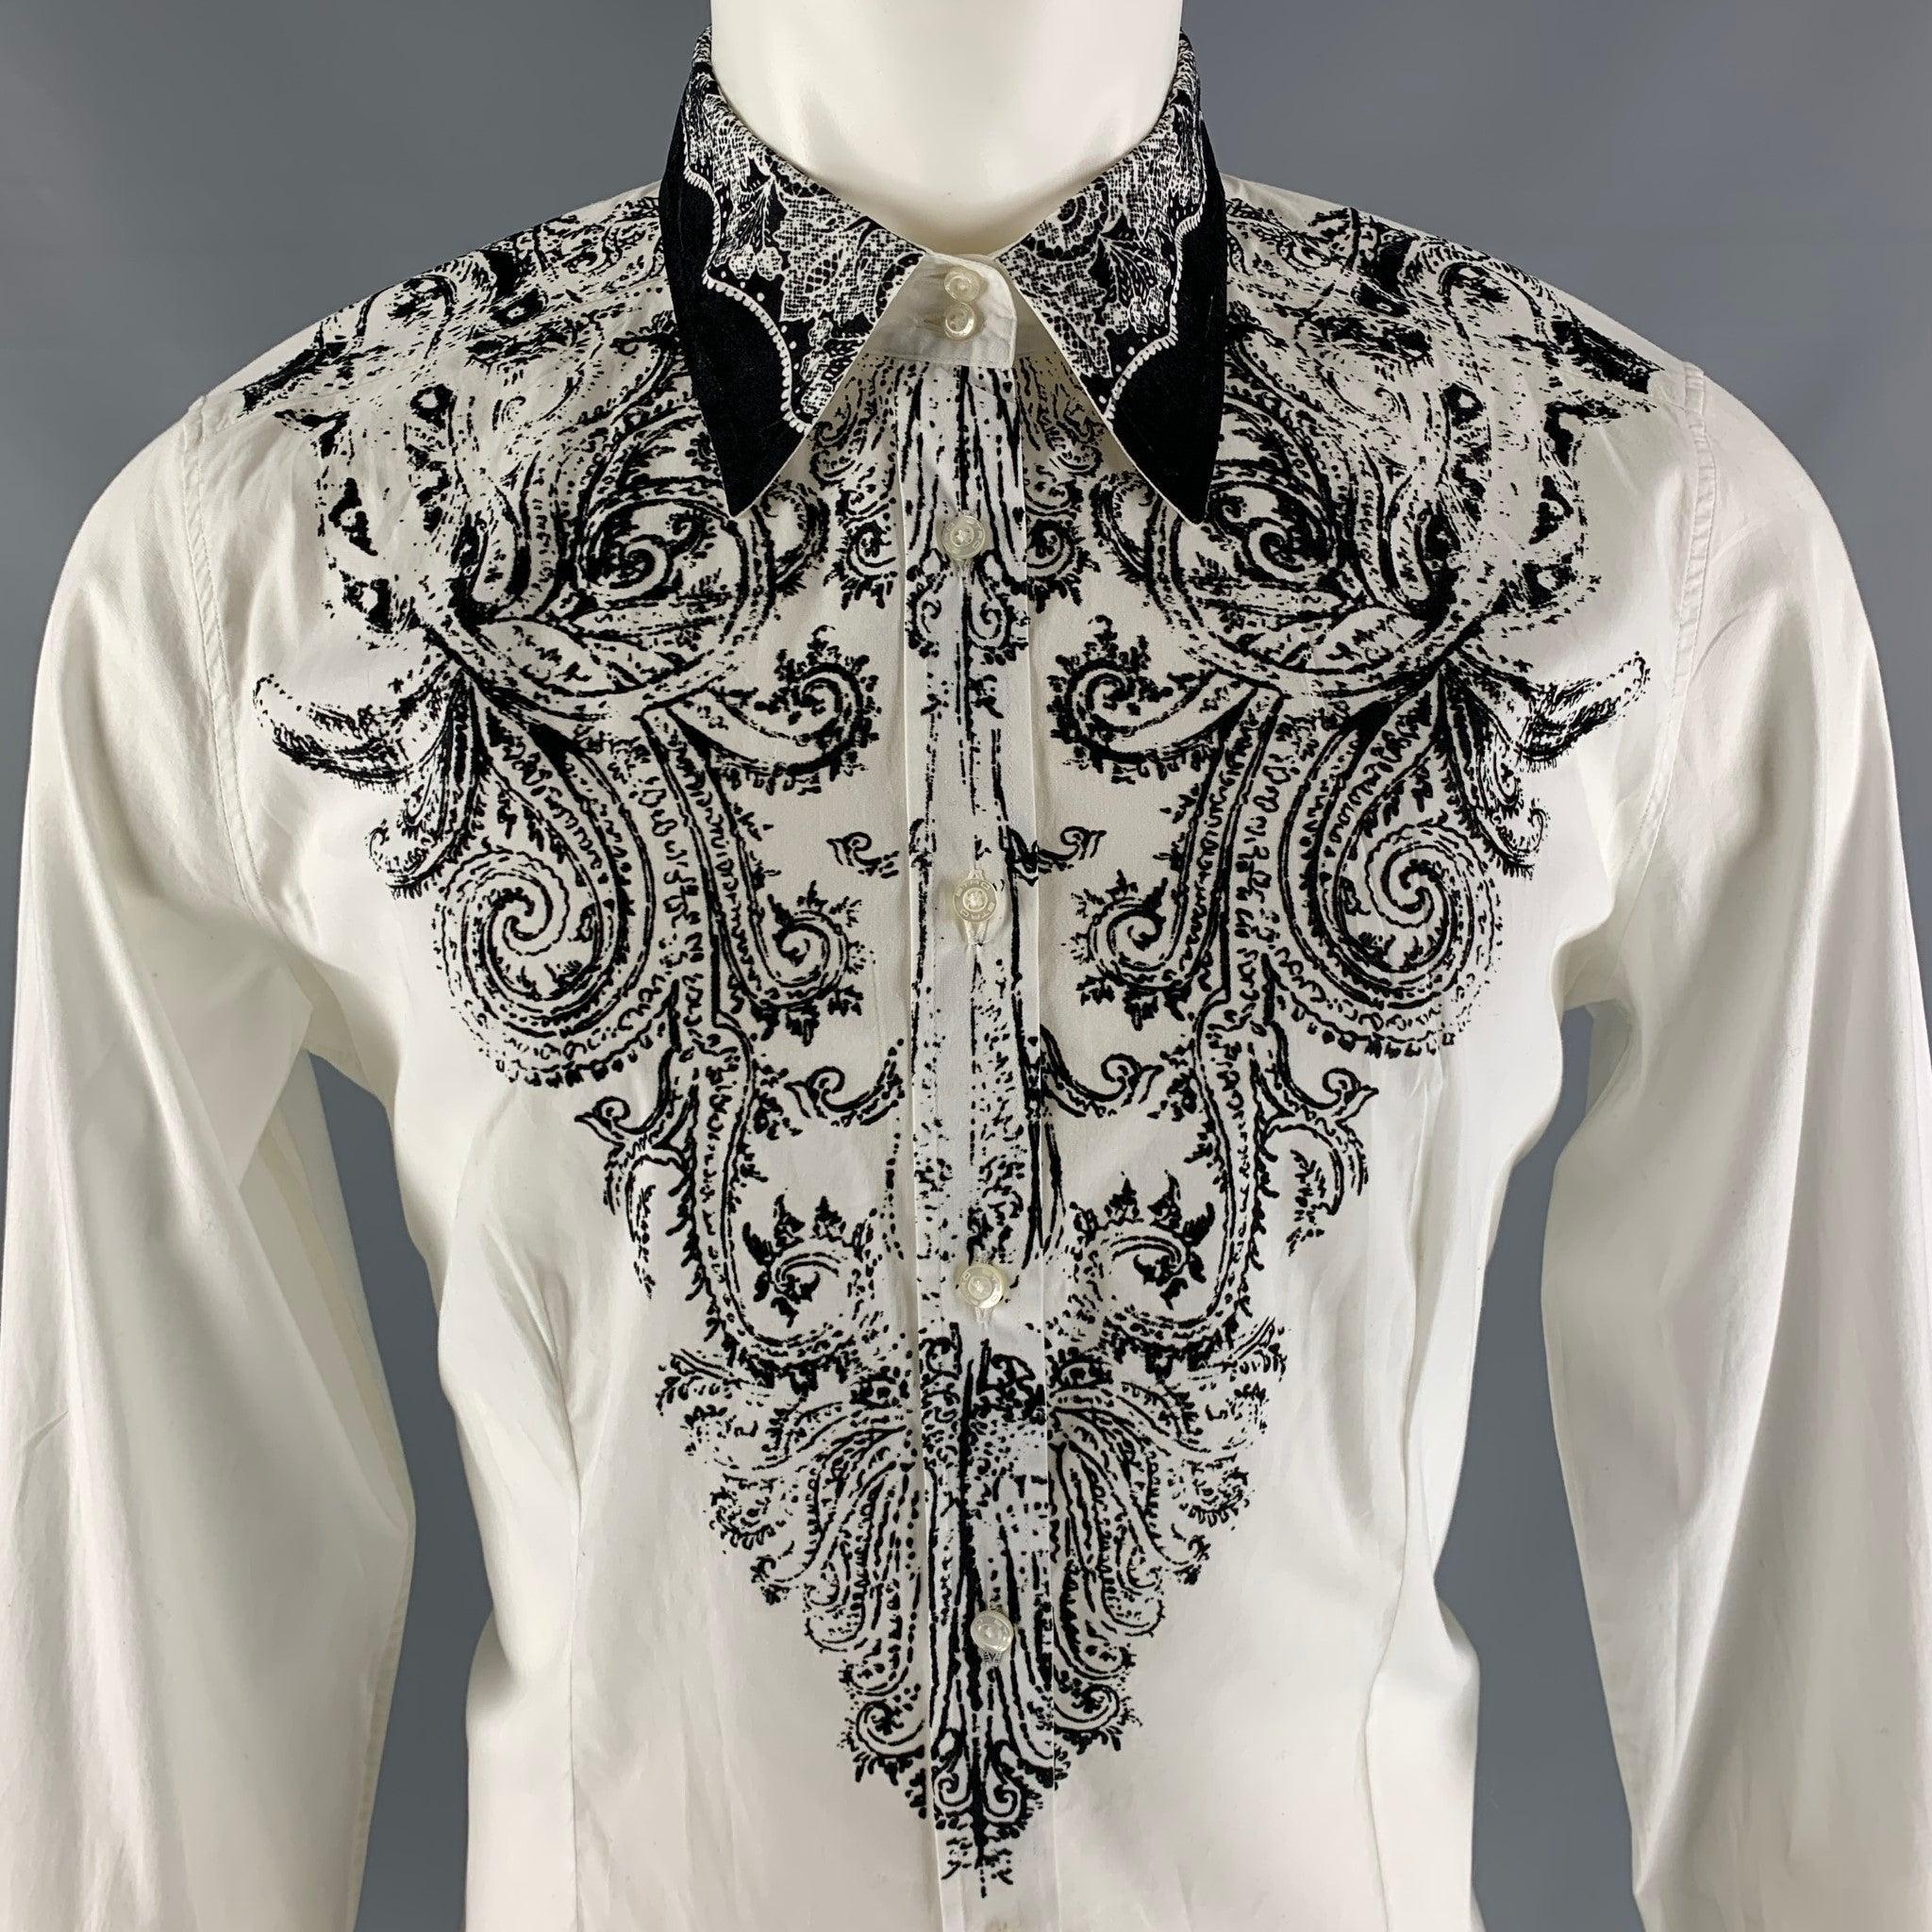 ETRO long sleeve shirt comes in a white cotton and elastane featuring a velvet applique at front and cuff, button up closure , two button angle cuff, and a straight collar. Made in Italy.Excellent Pre-Owned Condition. 

Marked:   50 

Measurements: